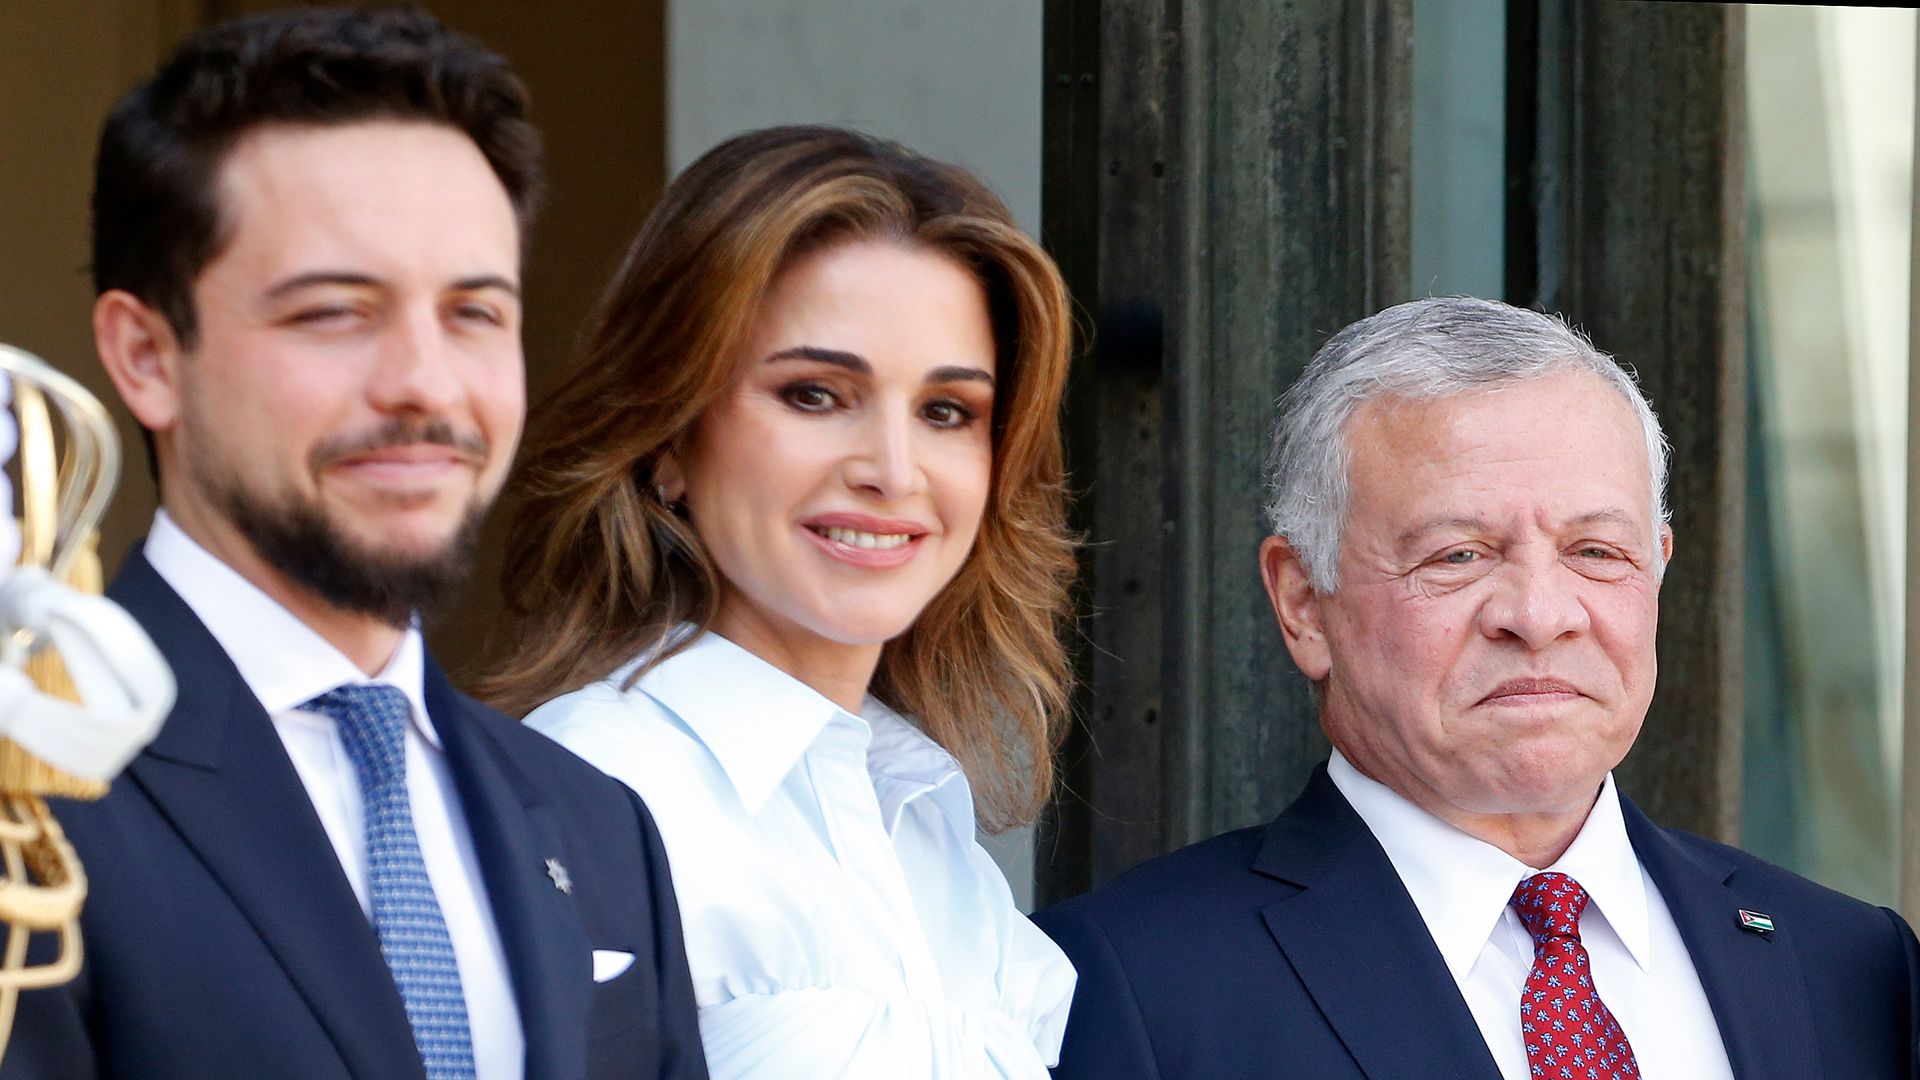 Crown Prince Hussein is the eldest child of King Abdullah II of Jordan and his wife Queen Rania